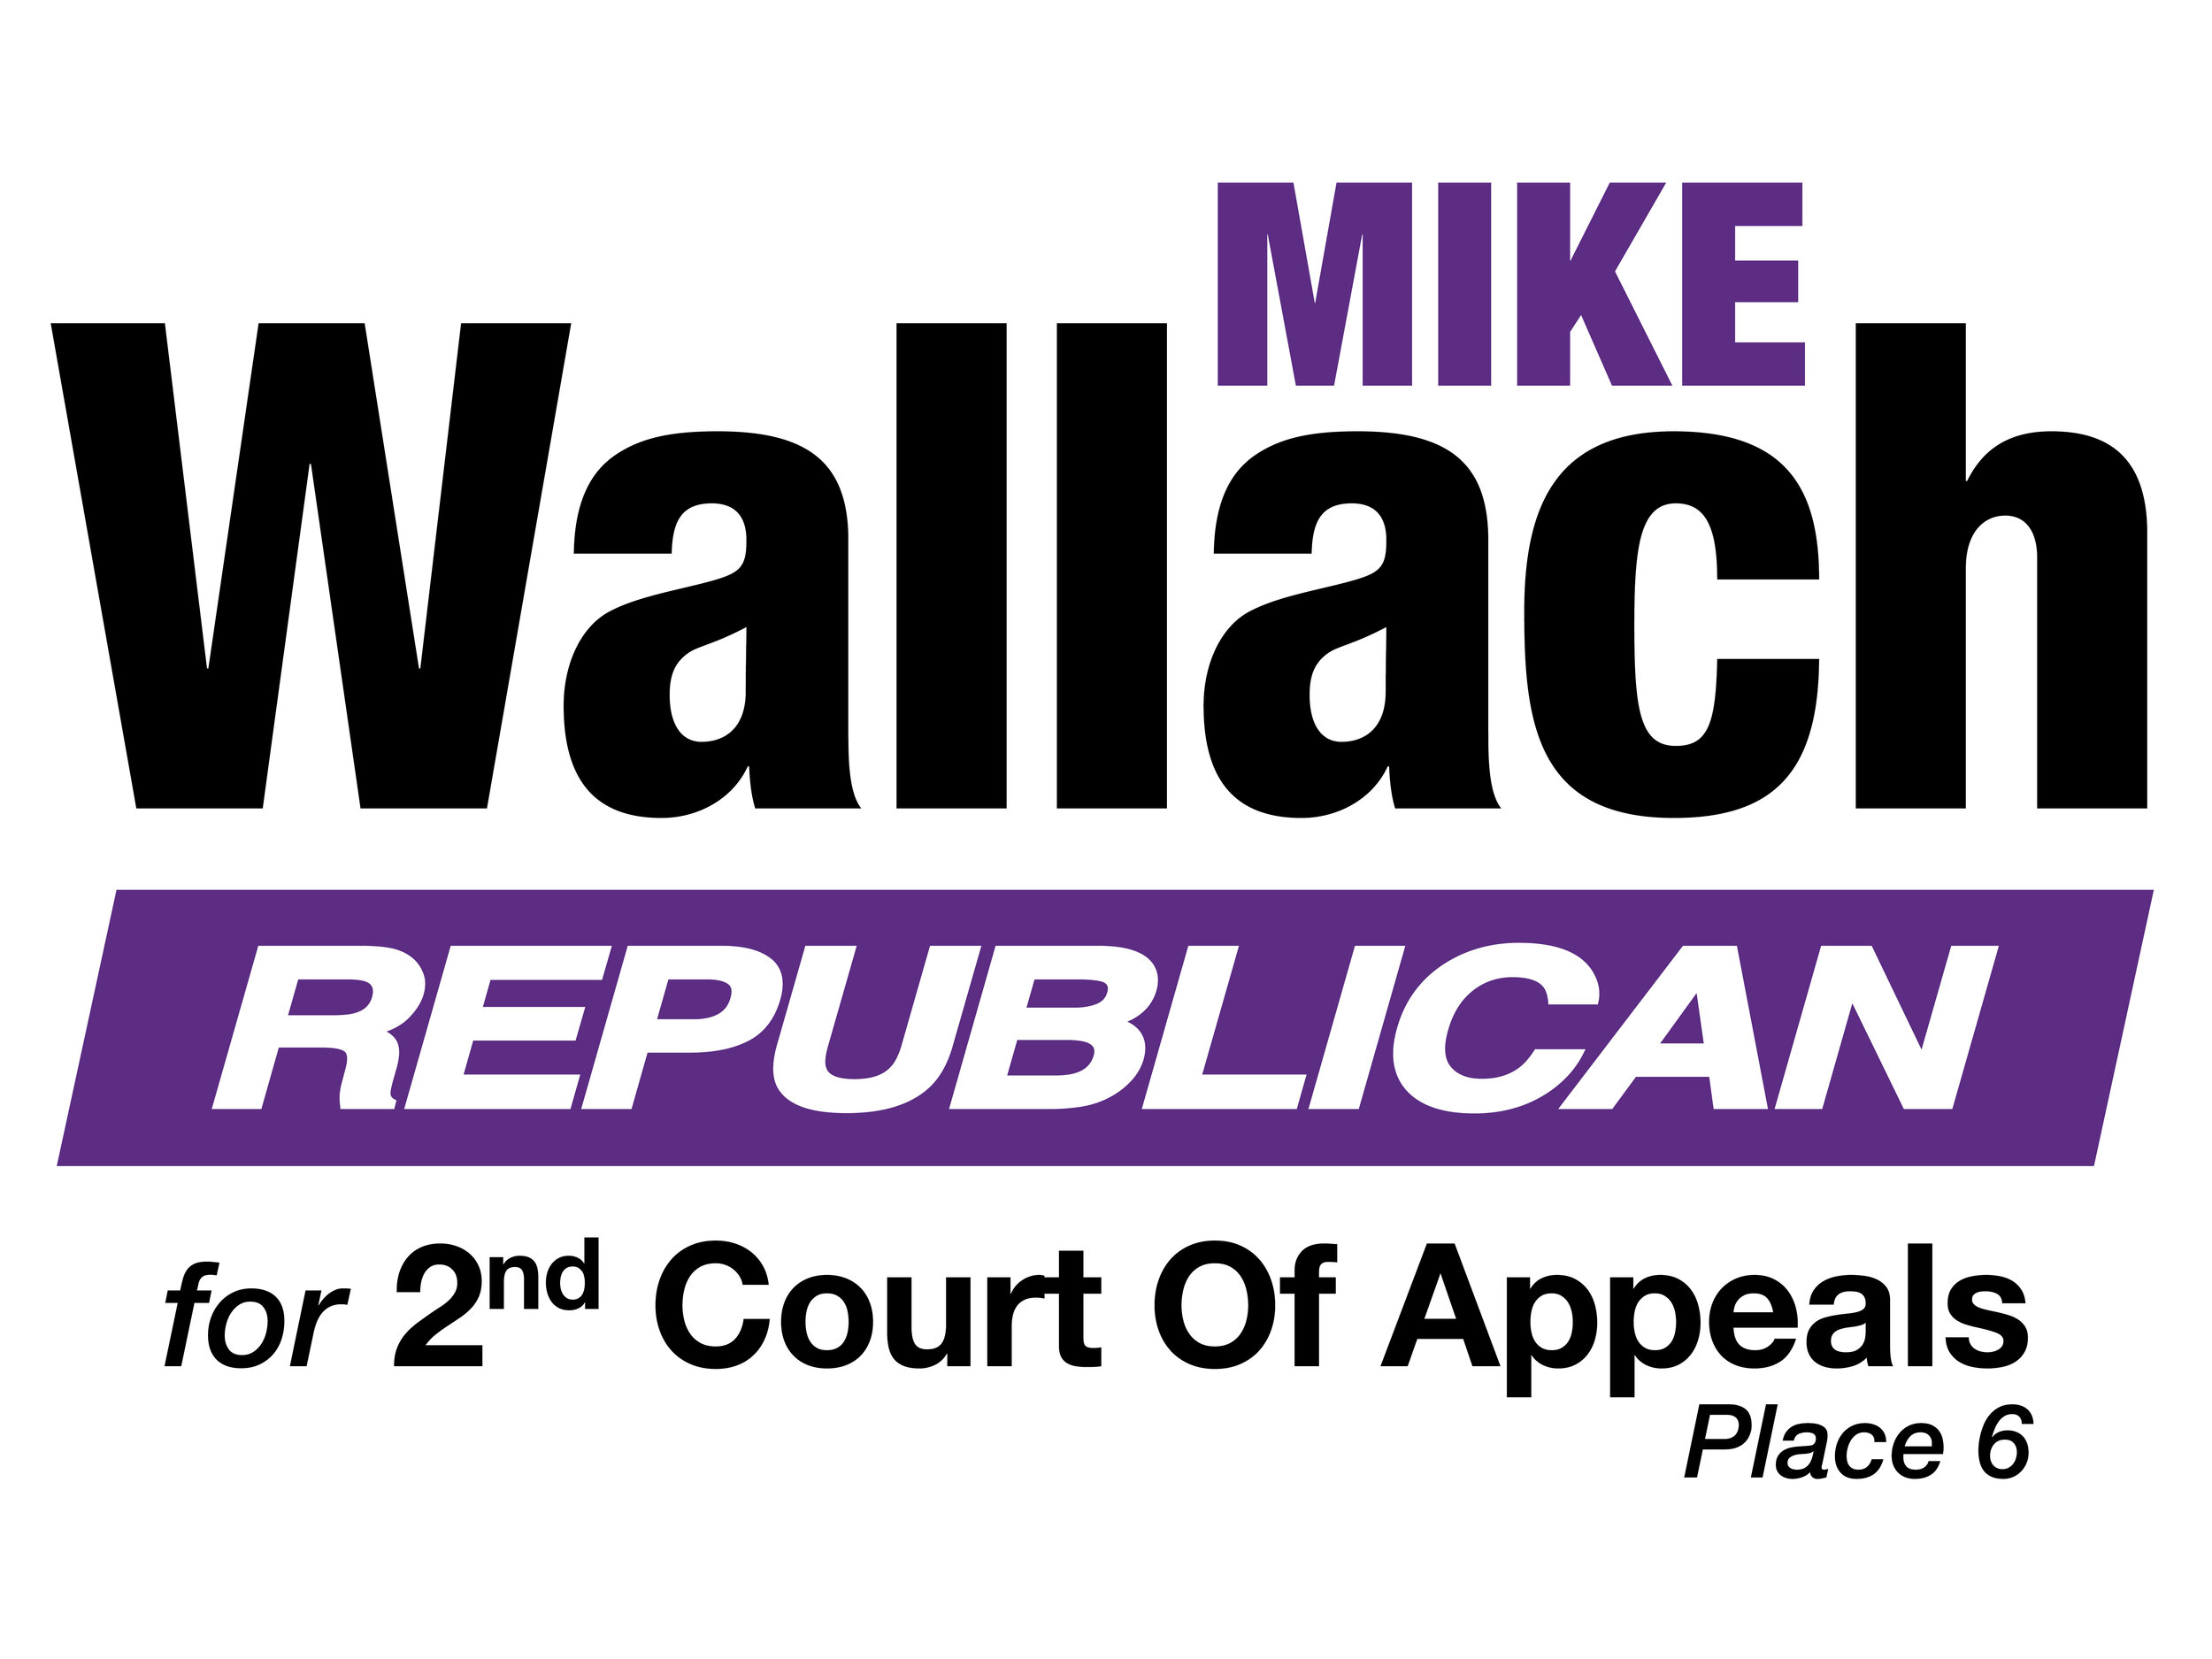 Mike Wallach, Second Court of Appeals